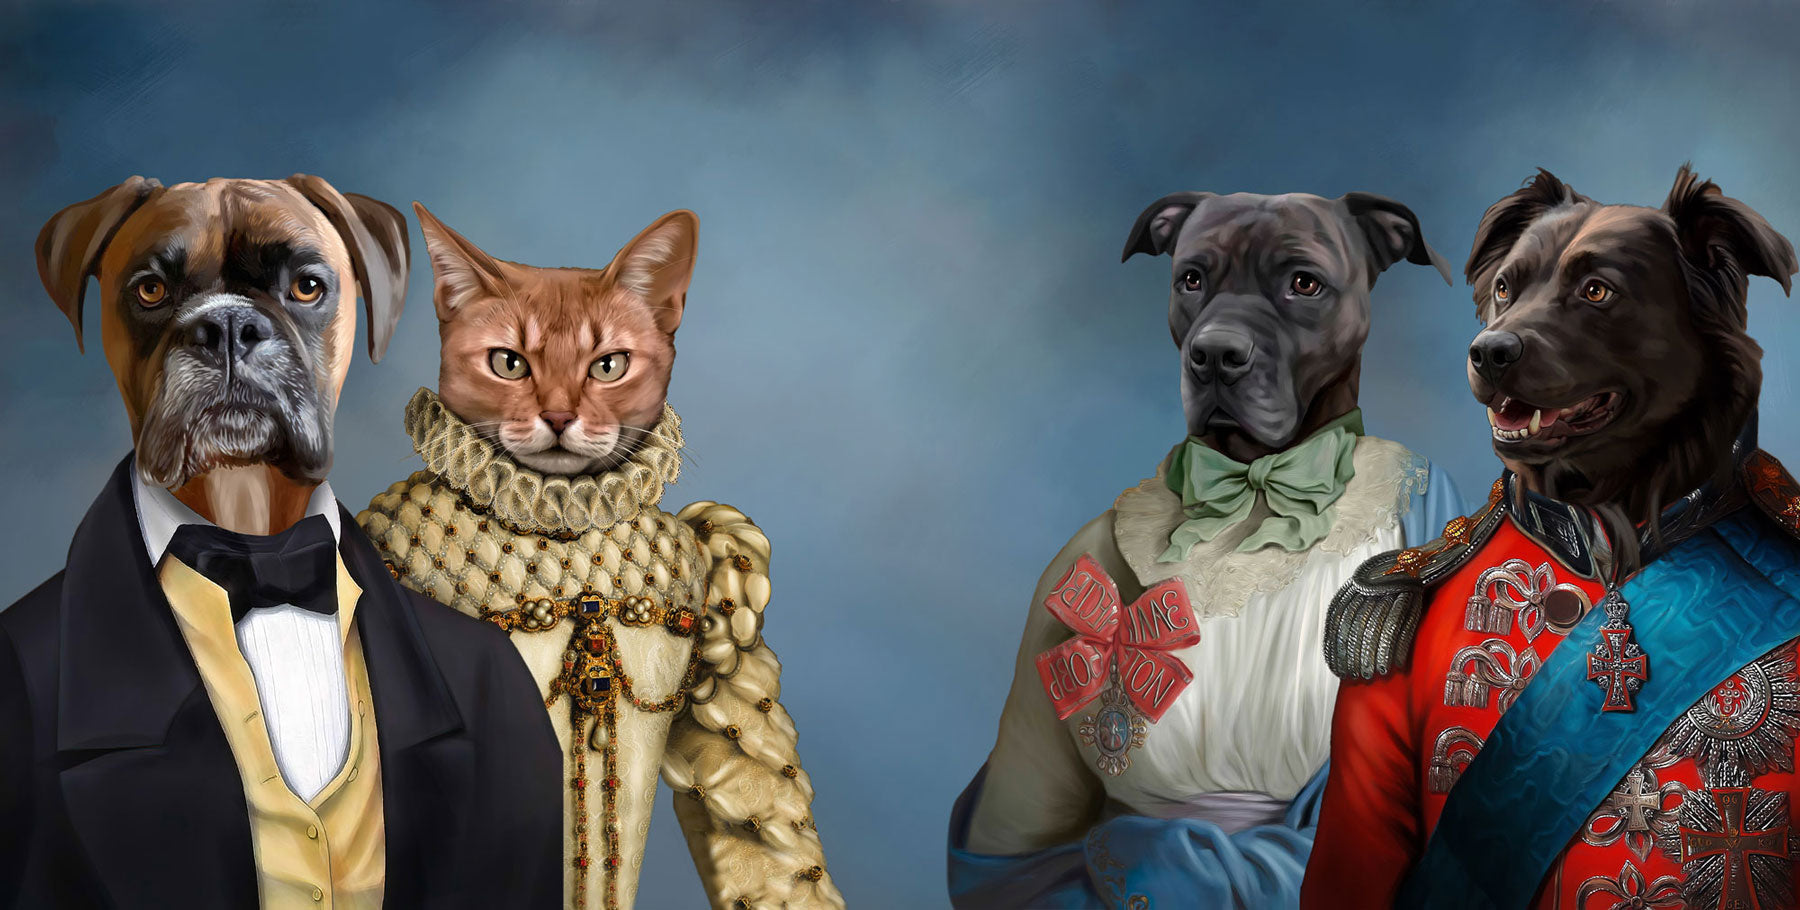 Collection of custom royal pet portraits paintings made from cats and dogs pictures and royal costumes